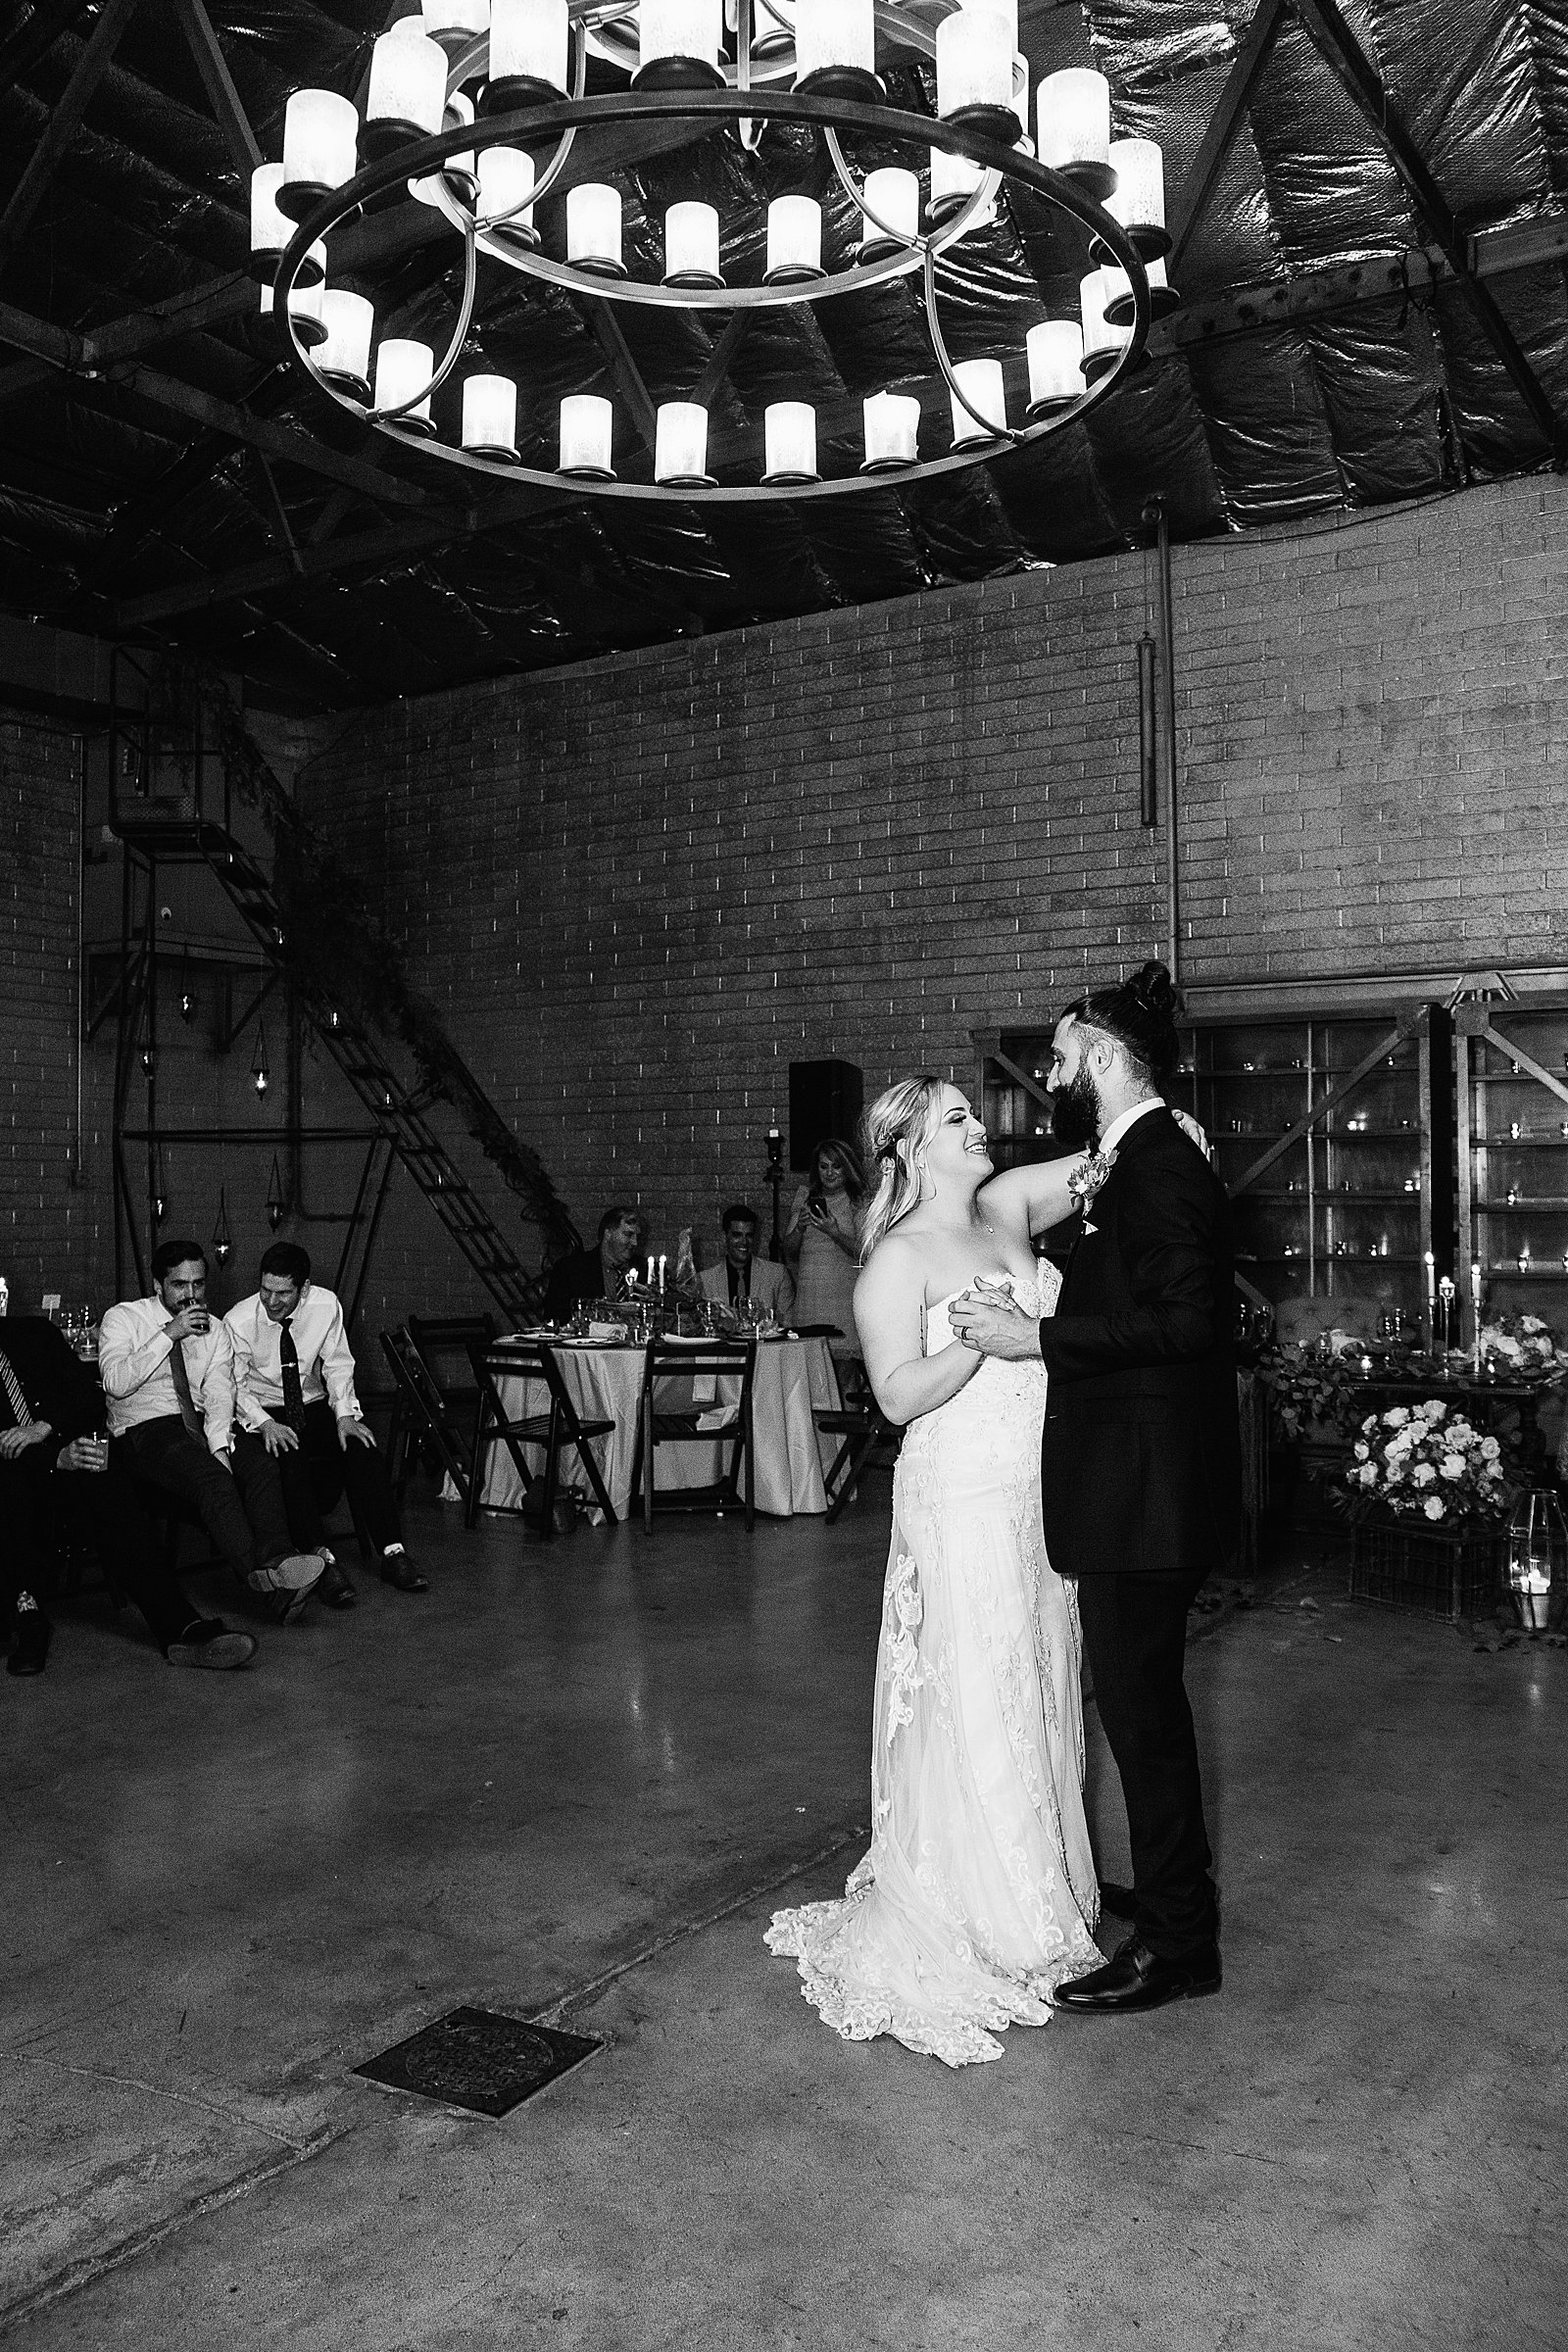 Bride and Groom sharing first dance at their The Ice House wedding reception by Arizona wedding photographer PMA Photography.